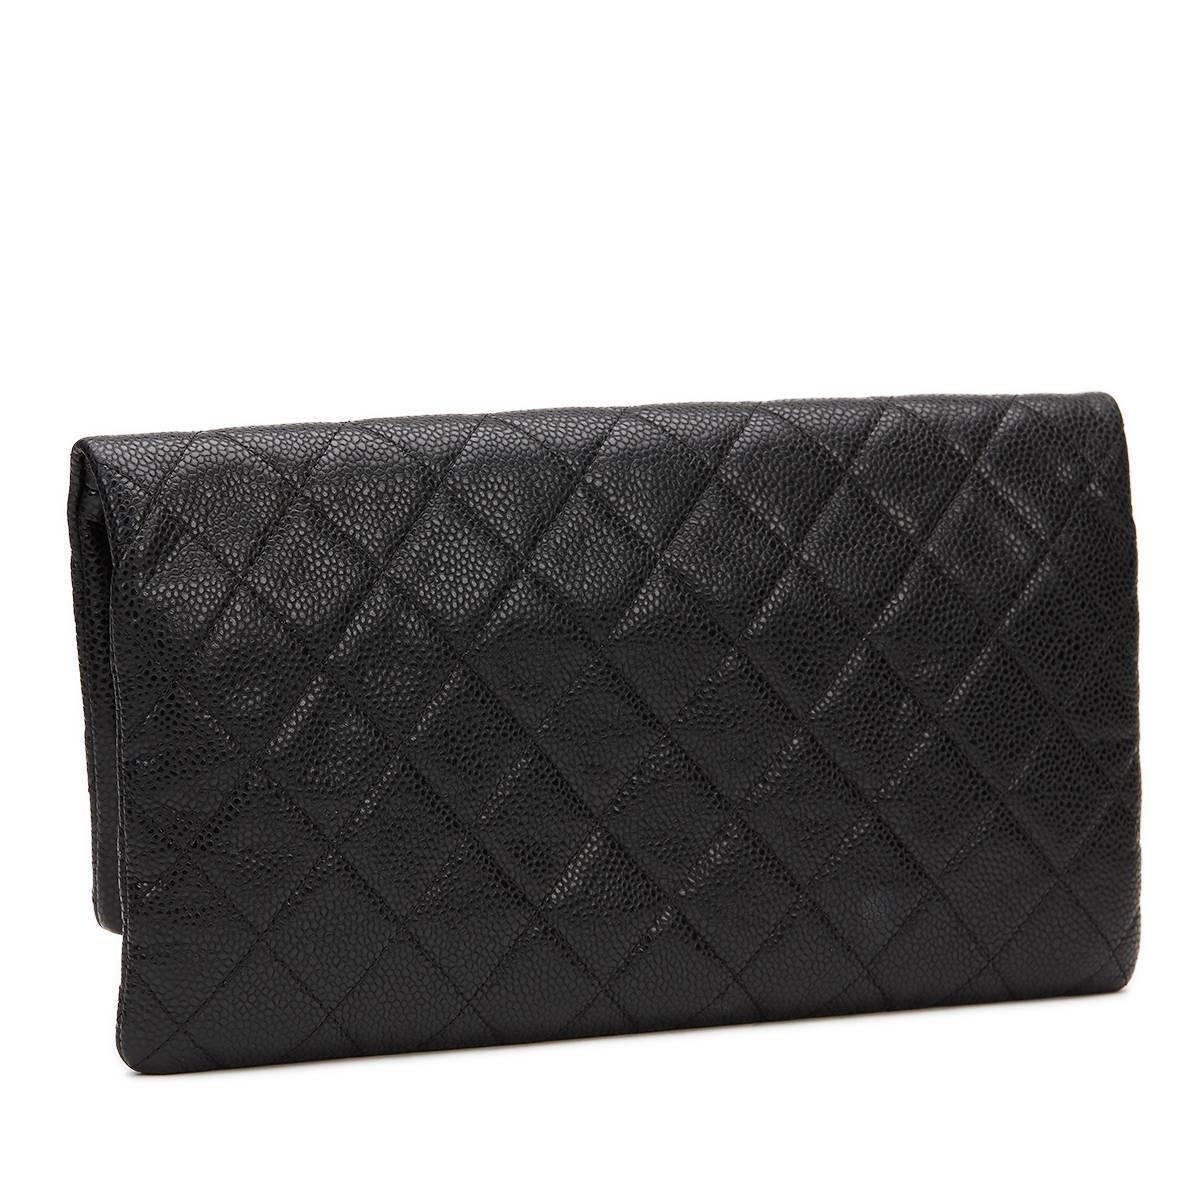 2015 Chanel Black Quilted Caviar Leather Beauty CC Foldover Clutch In Excellent Condition In Bishop's Stortford, Hertfordshire